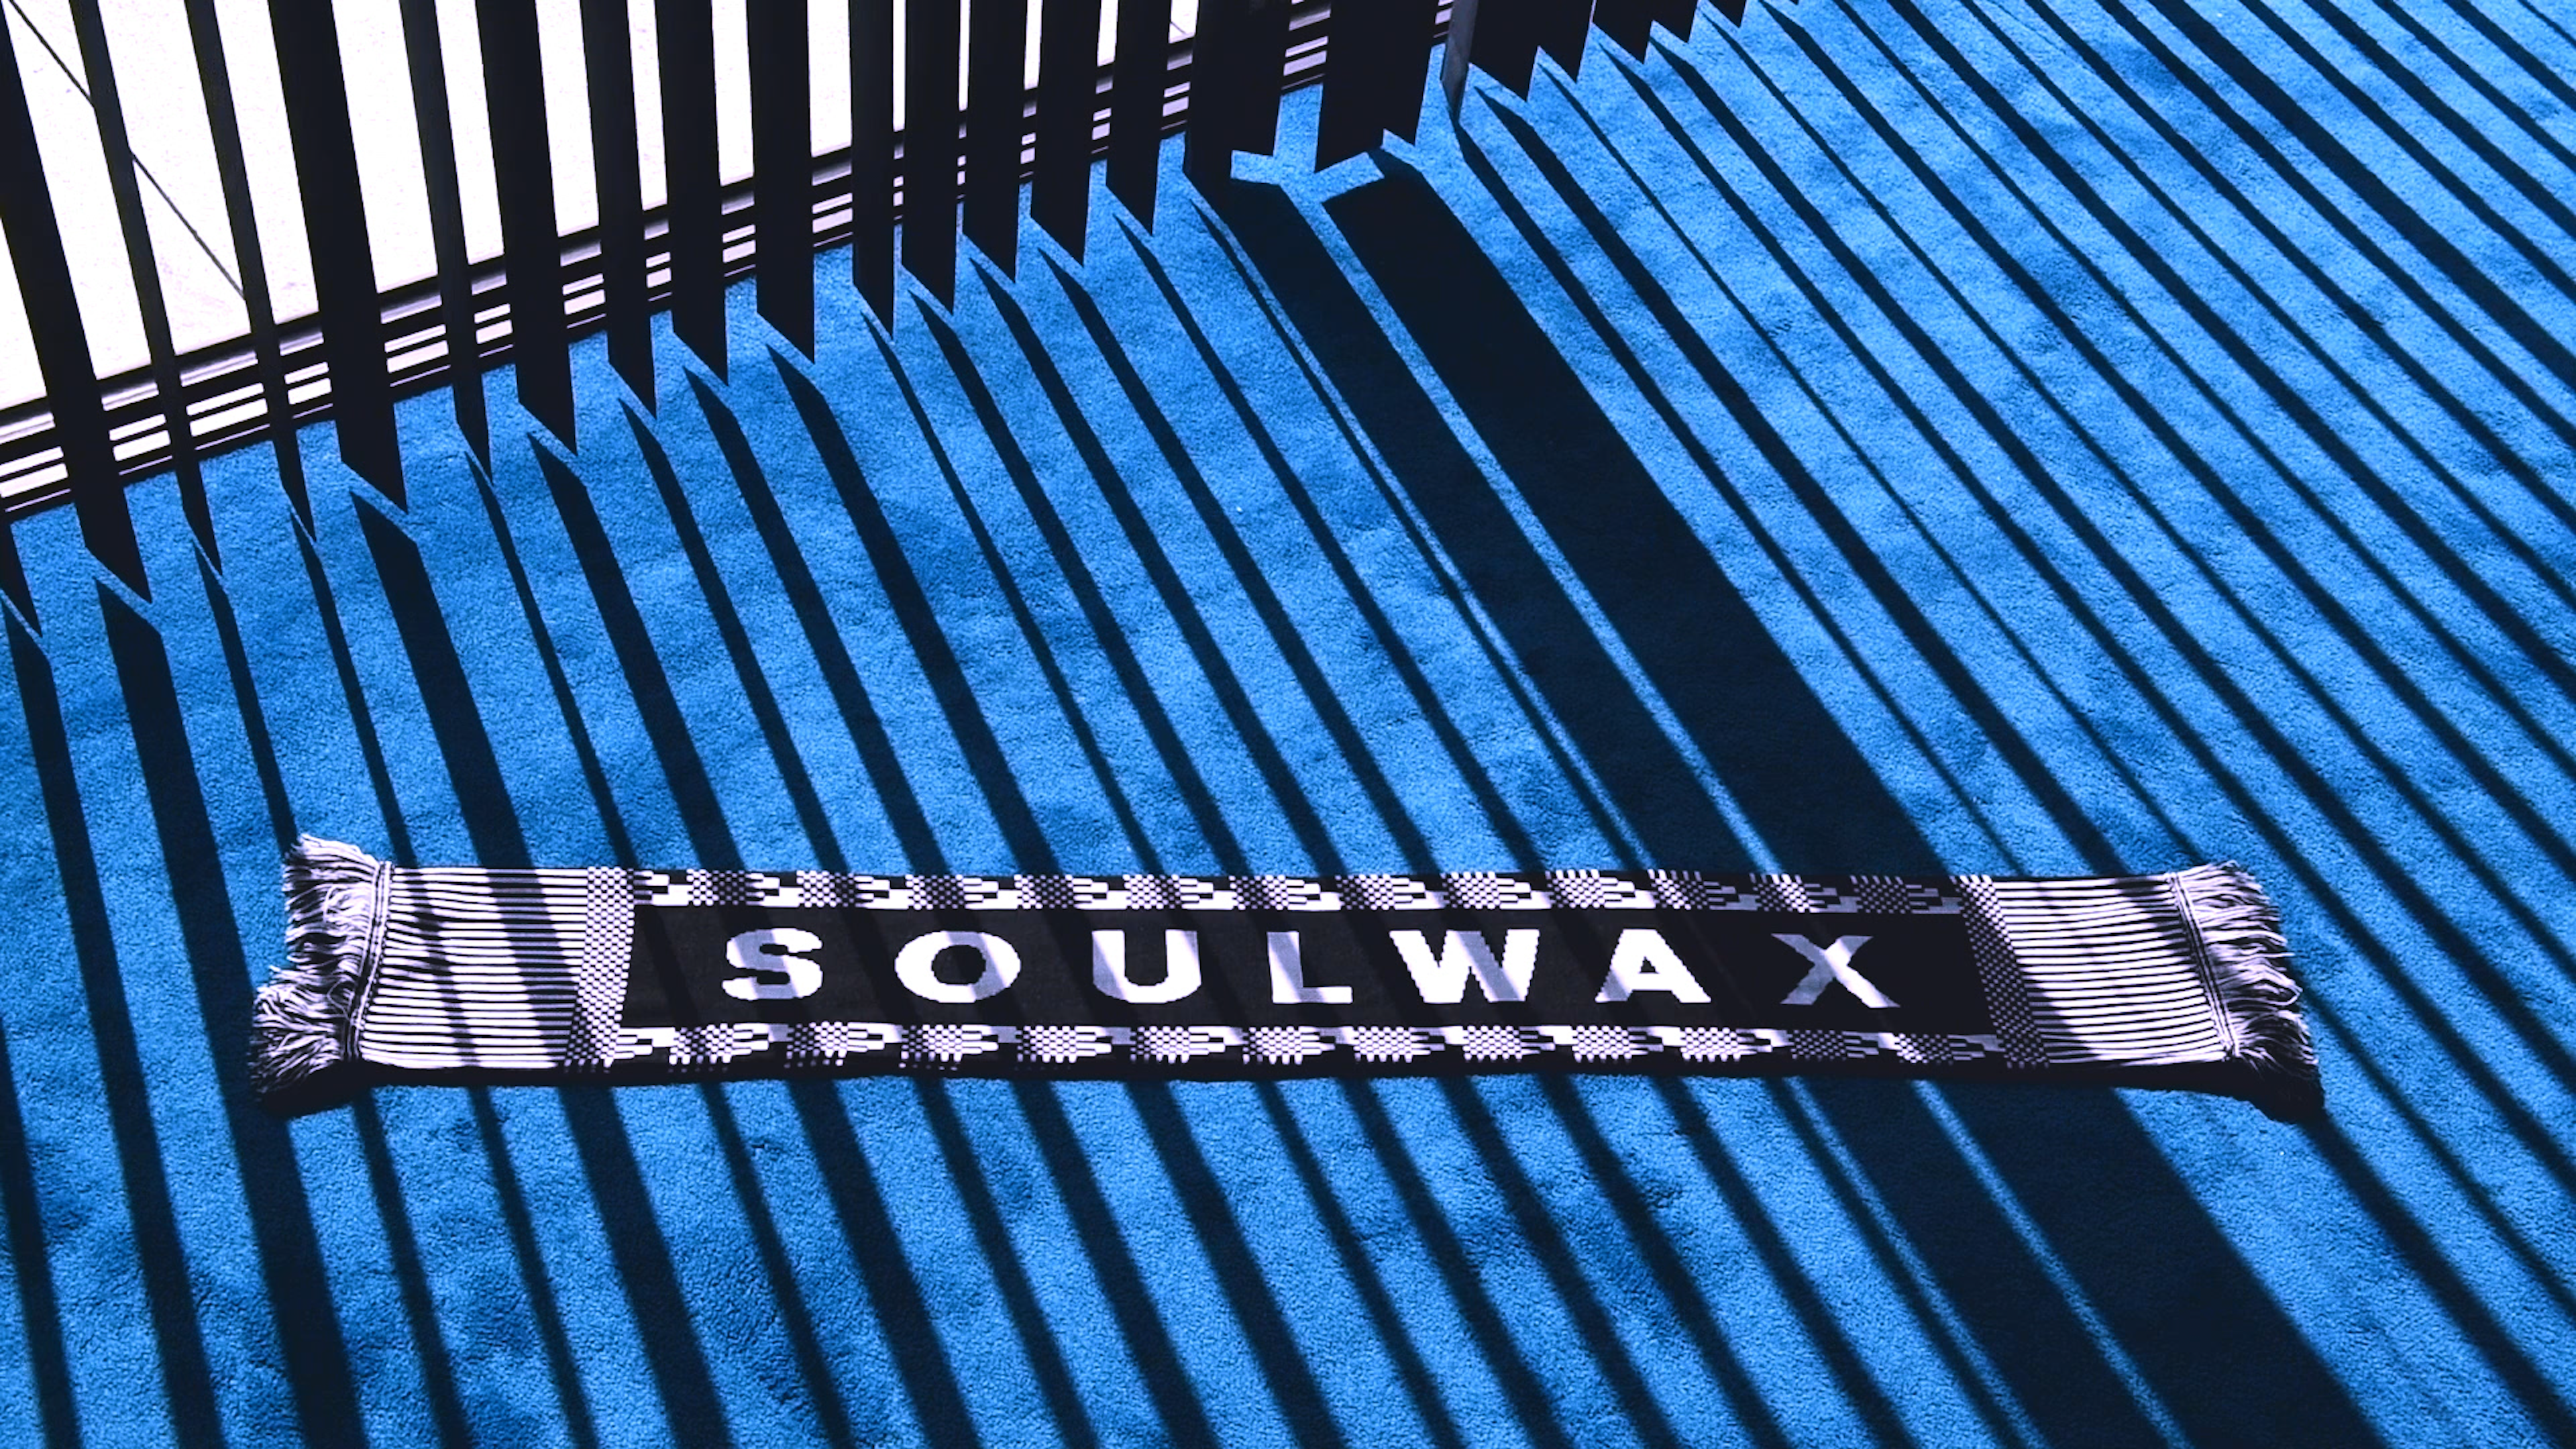 A scarf with "Soulwax" written on it lays on a blue carpet